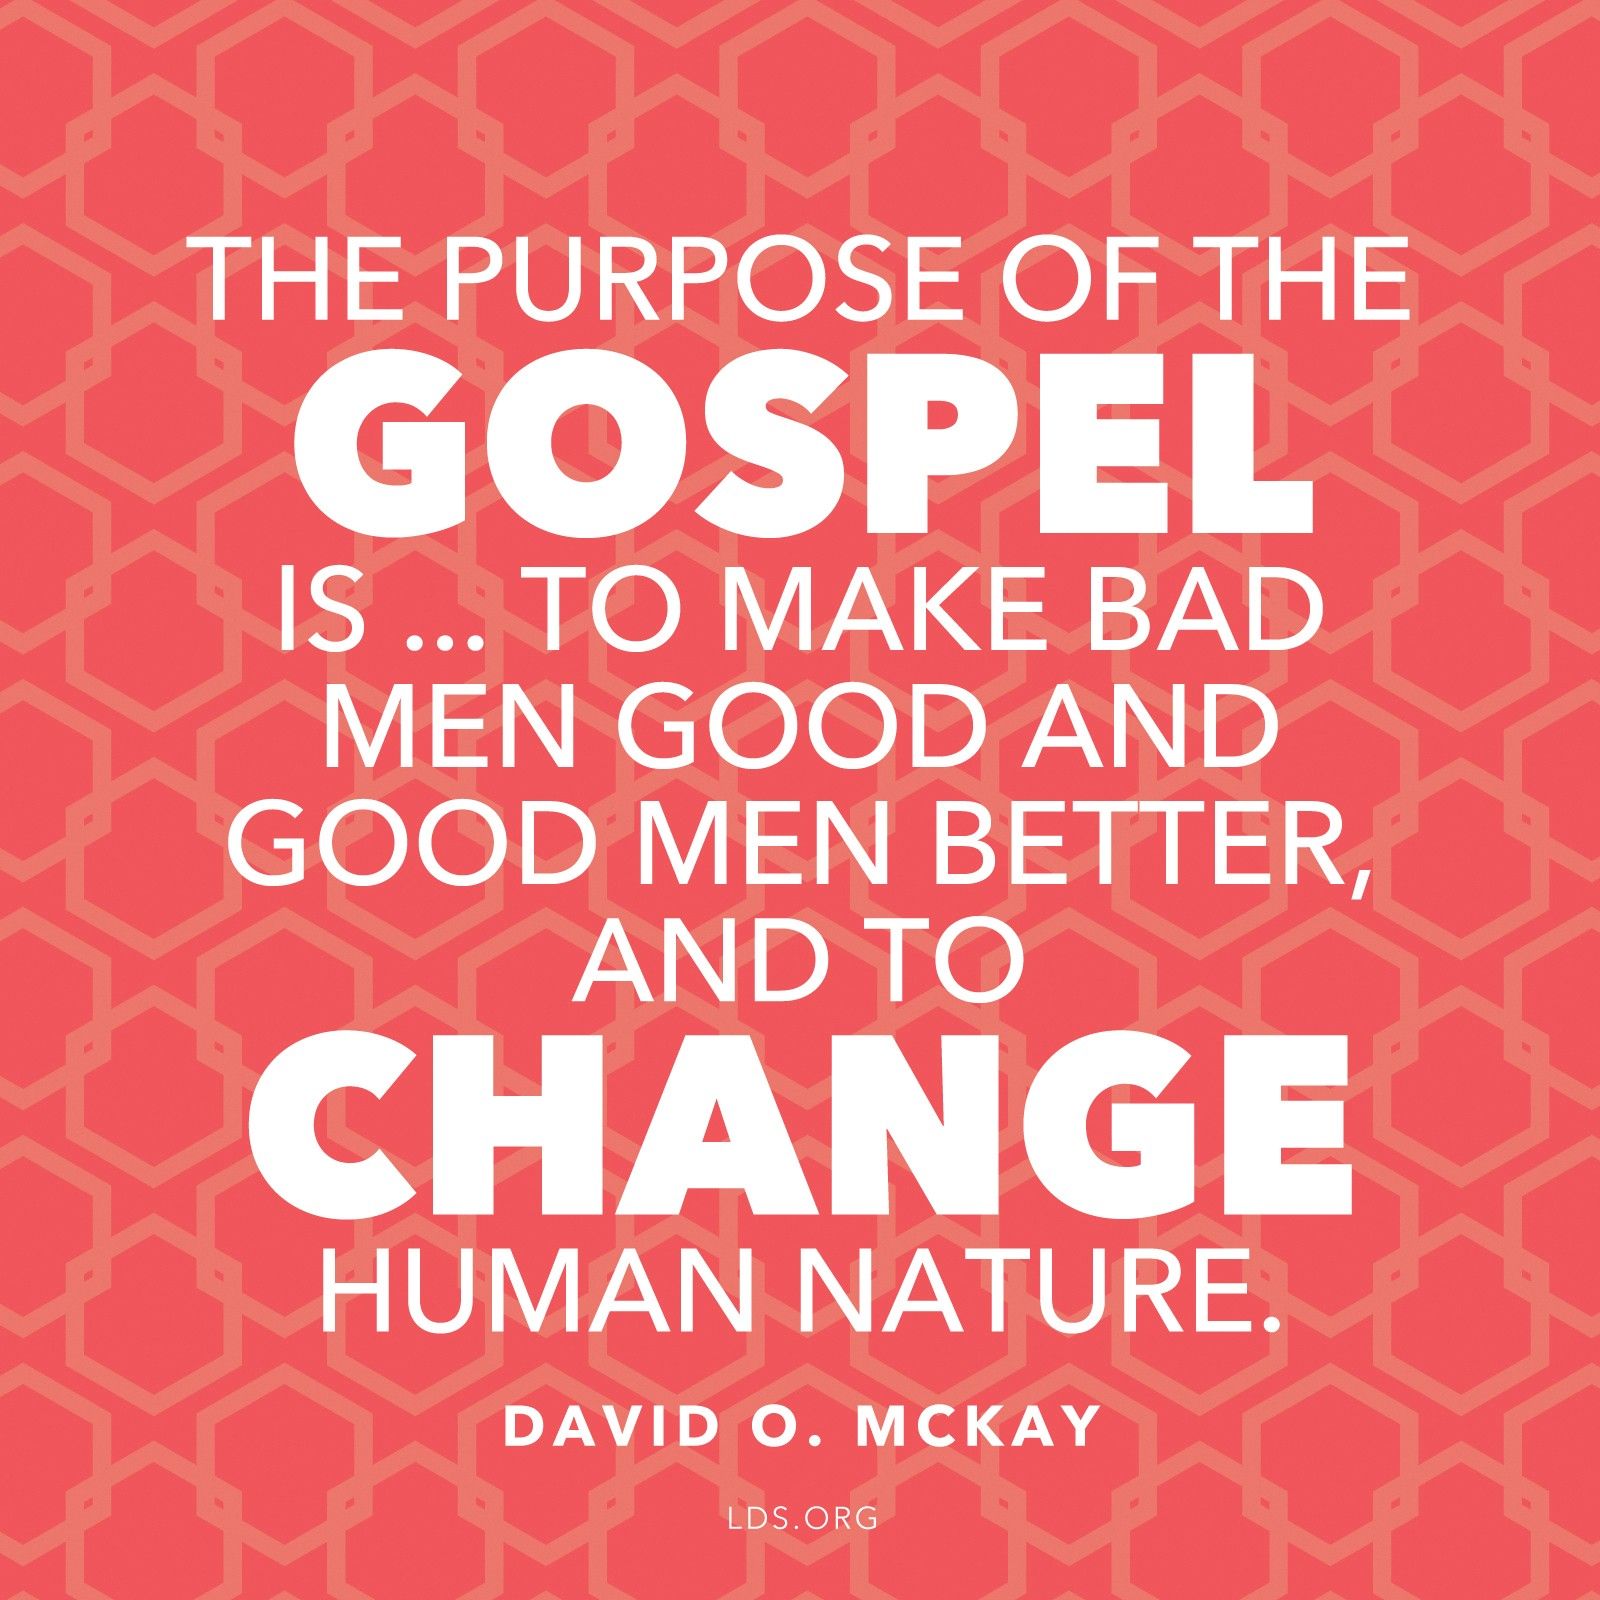 “The purpose of the gospel is … to make bad men good and good men better, and to change human nature.”—President David O. McKay, in the film Every Member a Missionary, as quoted by Elder Franklin D. Richards in Conference Report, Oct. 1965